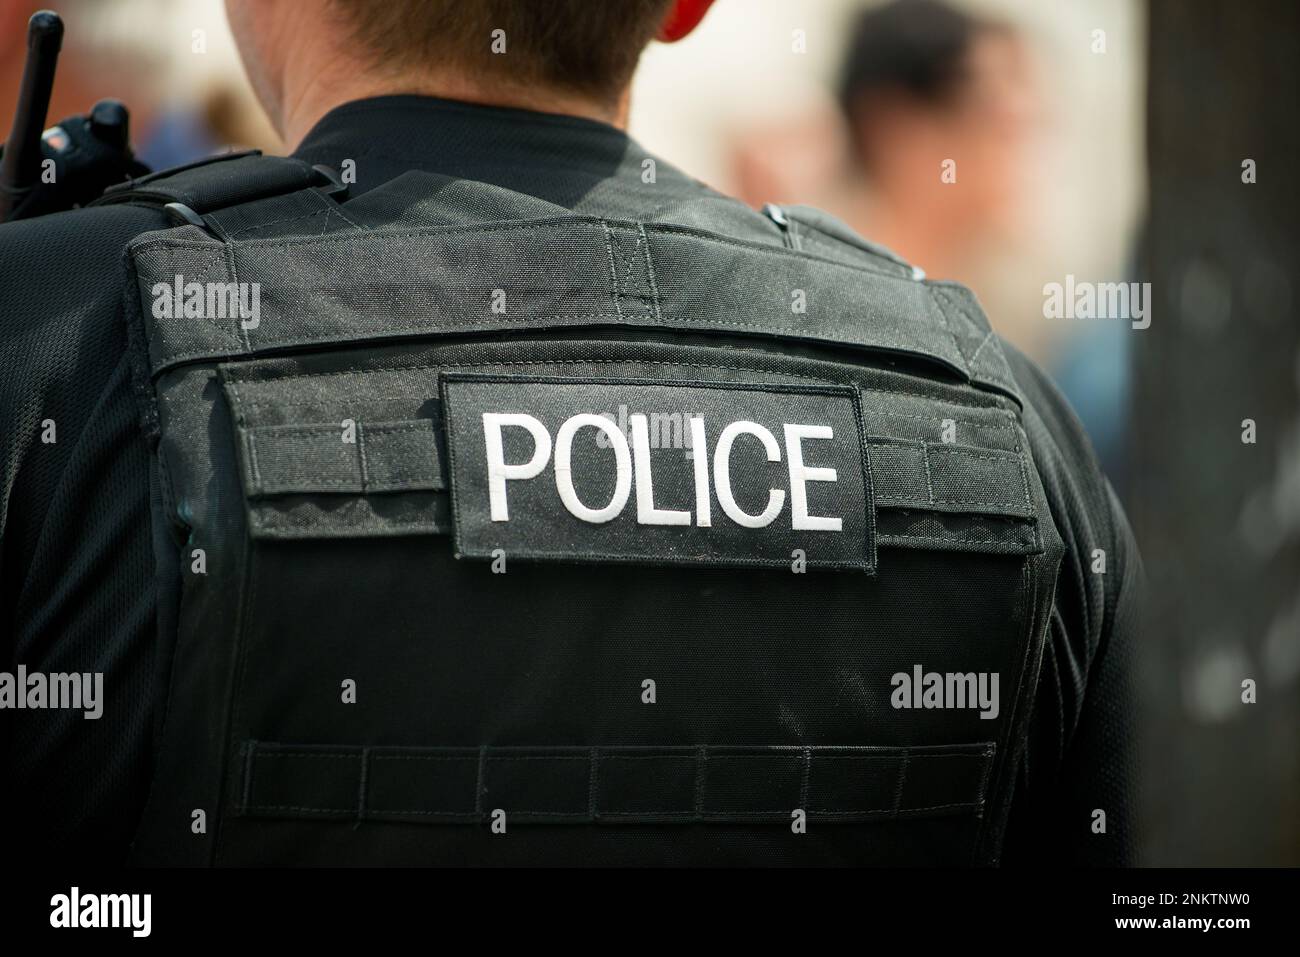 Whitehall, London, UK. 16th July 2016. Police logo patch, being worn on the rear of a bullet proof vest by a Metropolitan police officer in London. Stock Photo